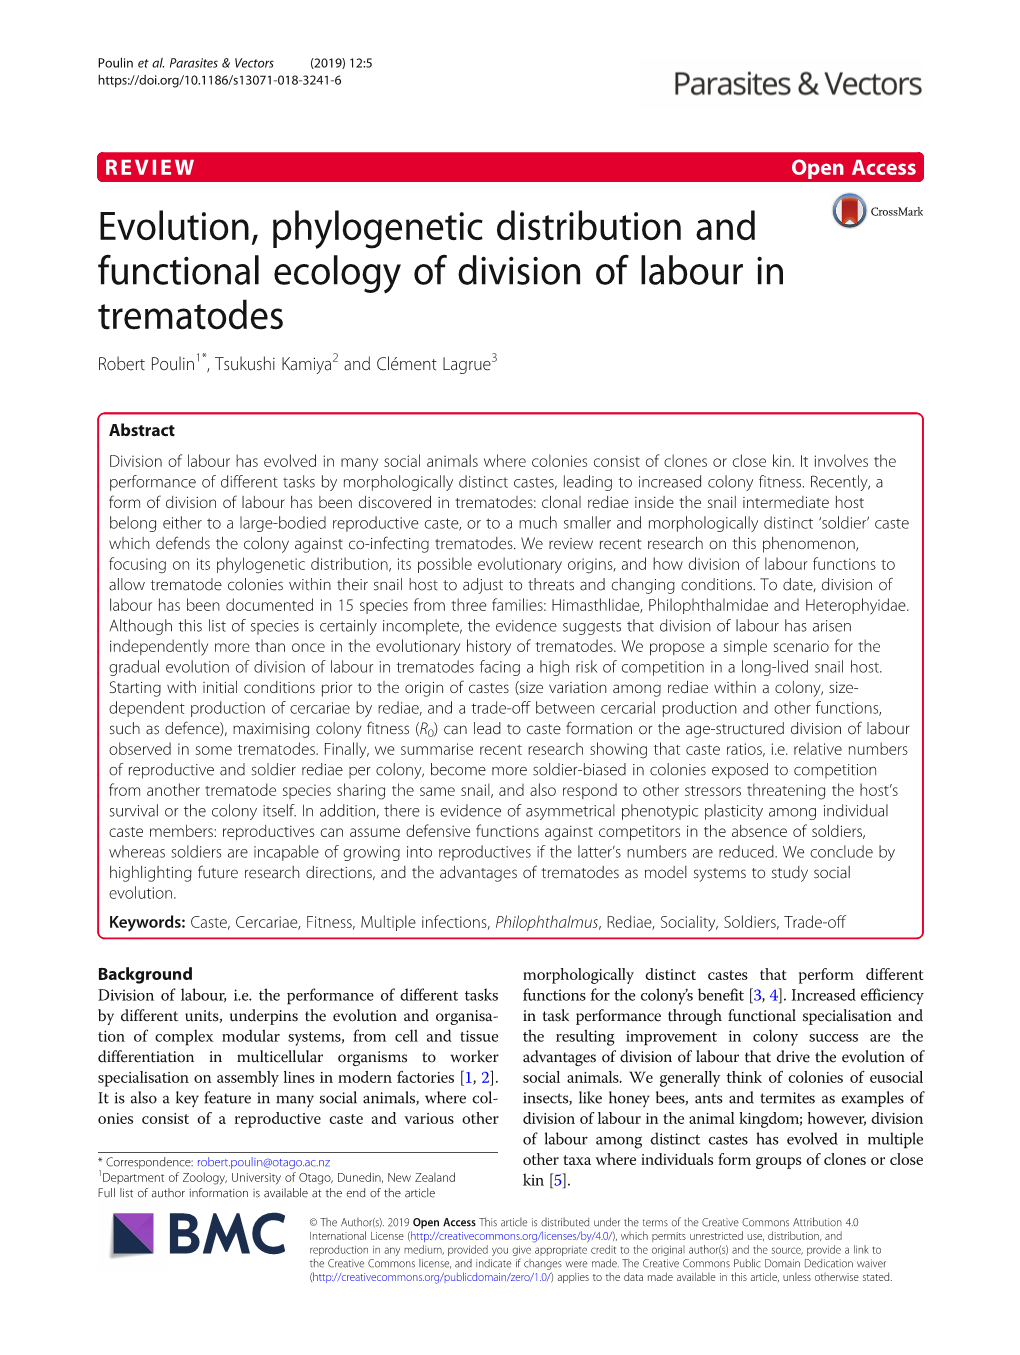 Evolution, Phylogenetic Distribution and Functional Ecology of Division of Labour in Trematodes Robert Poulin1*, Tsukushi Kamiya2 and Clément Lagrue3